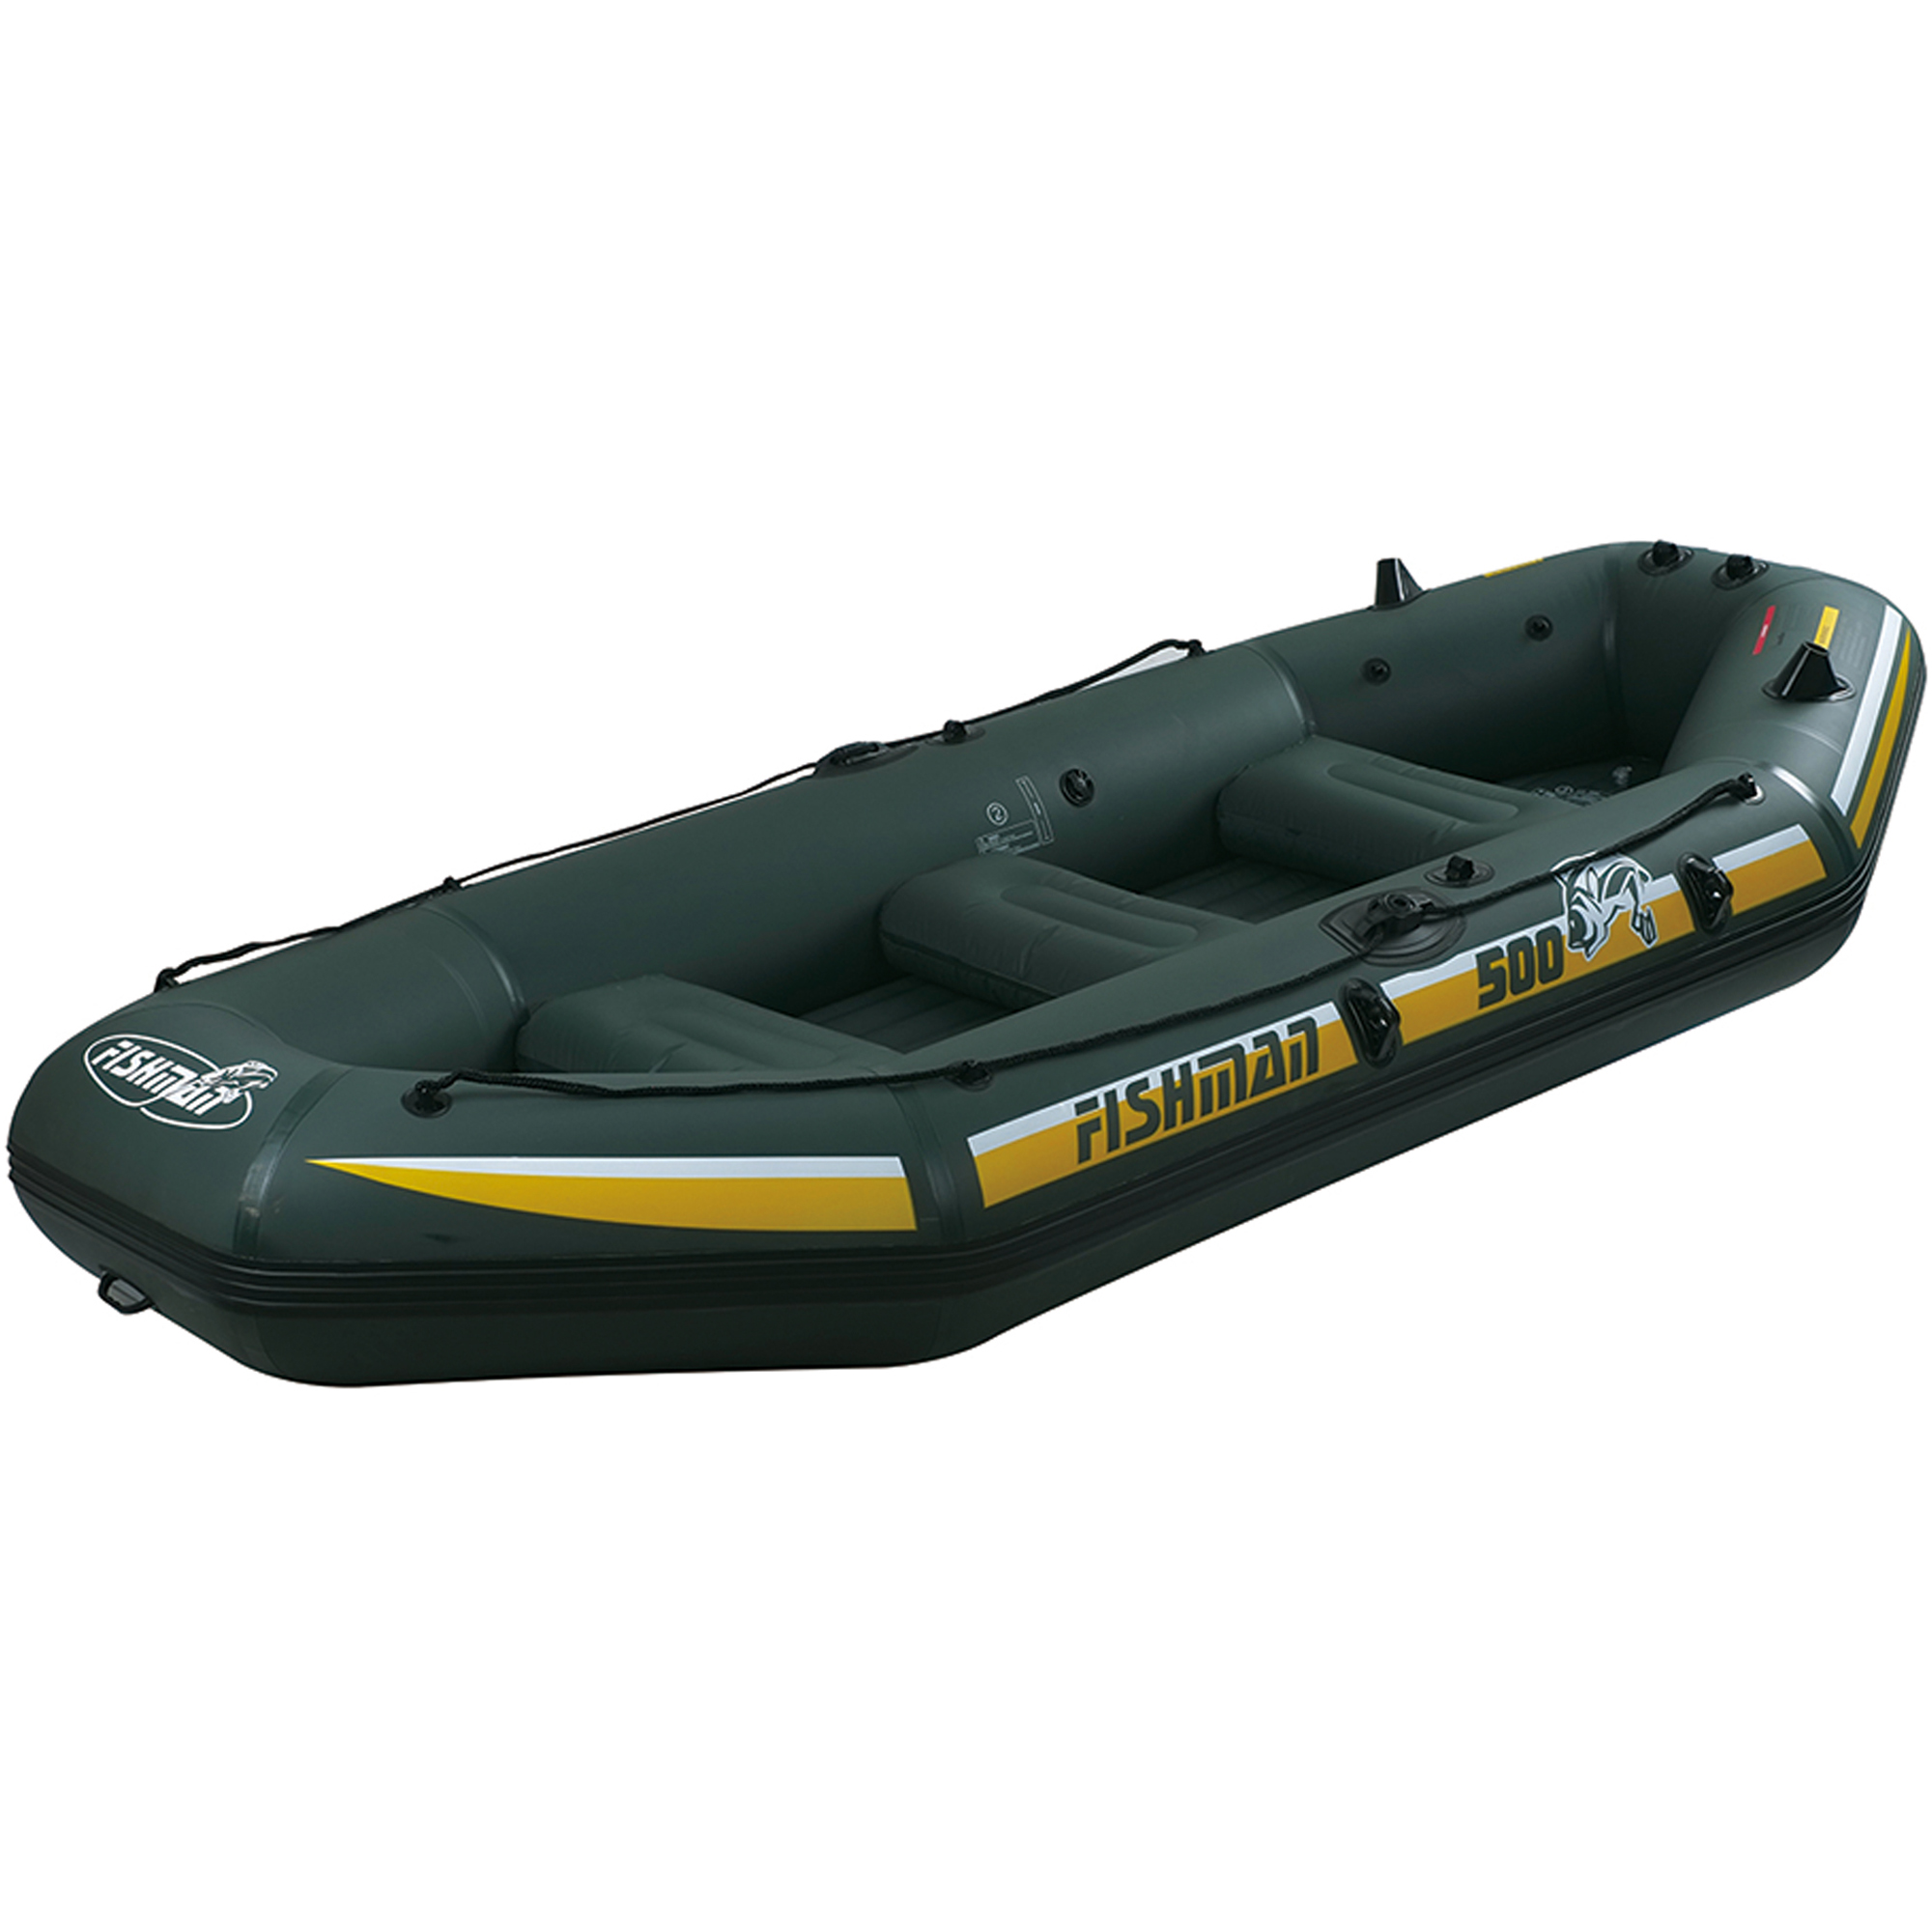 Z-Ray SW10339G Fishman II 500 Inflatable Boat Value Bundle - image 4 of 6